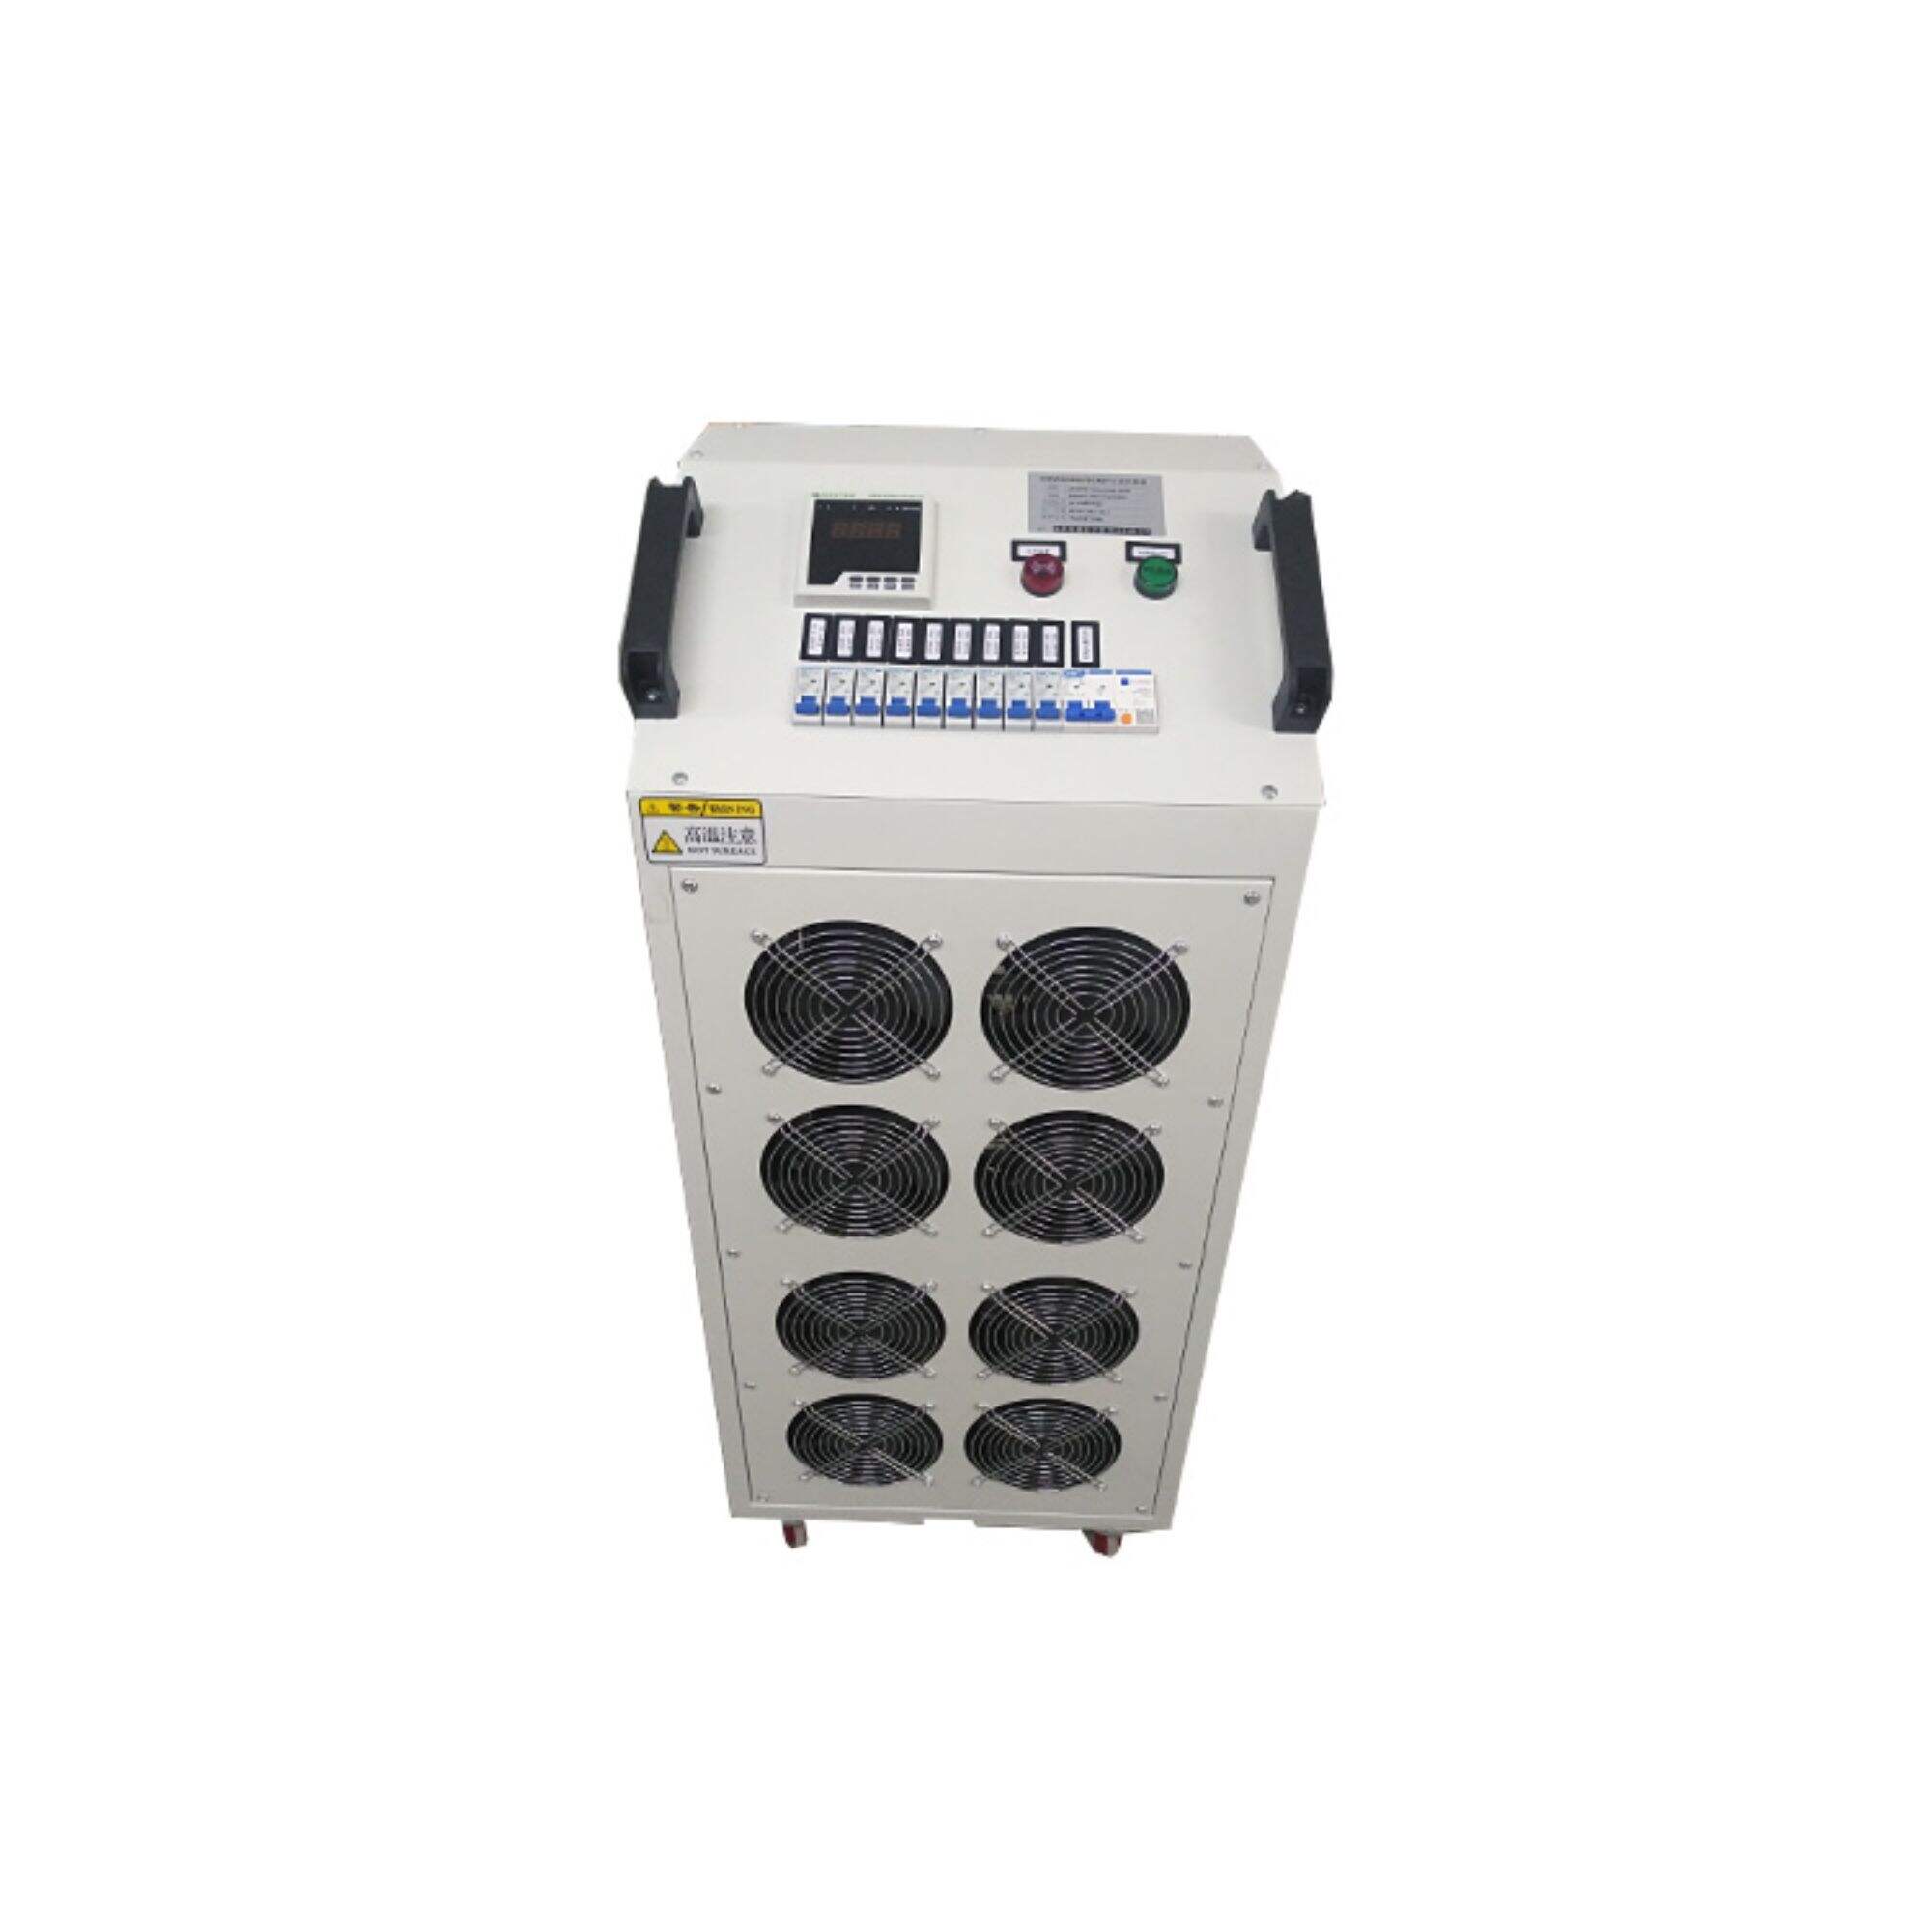 30KW adjustable load bank for detecting generator sets and ups